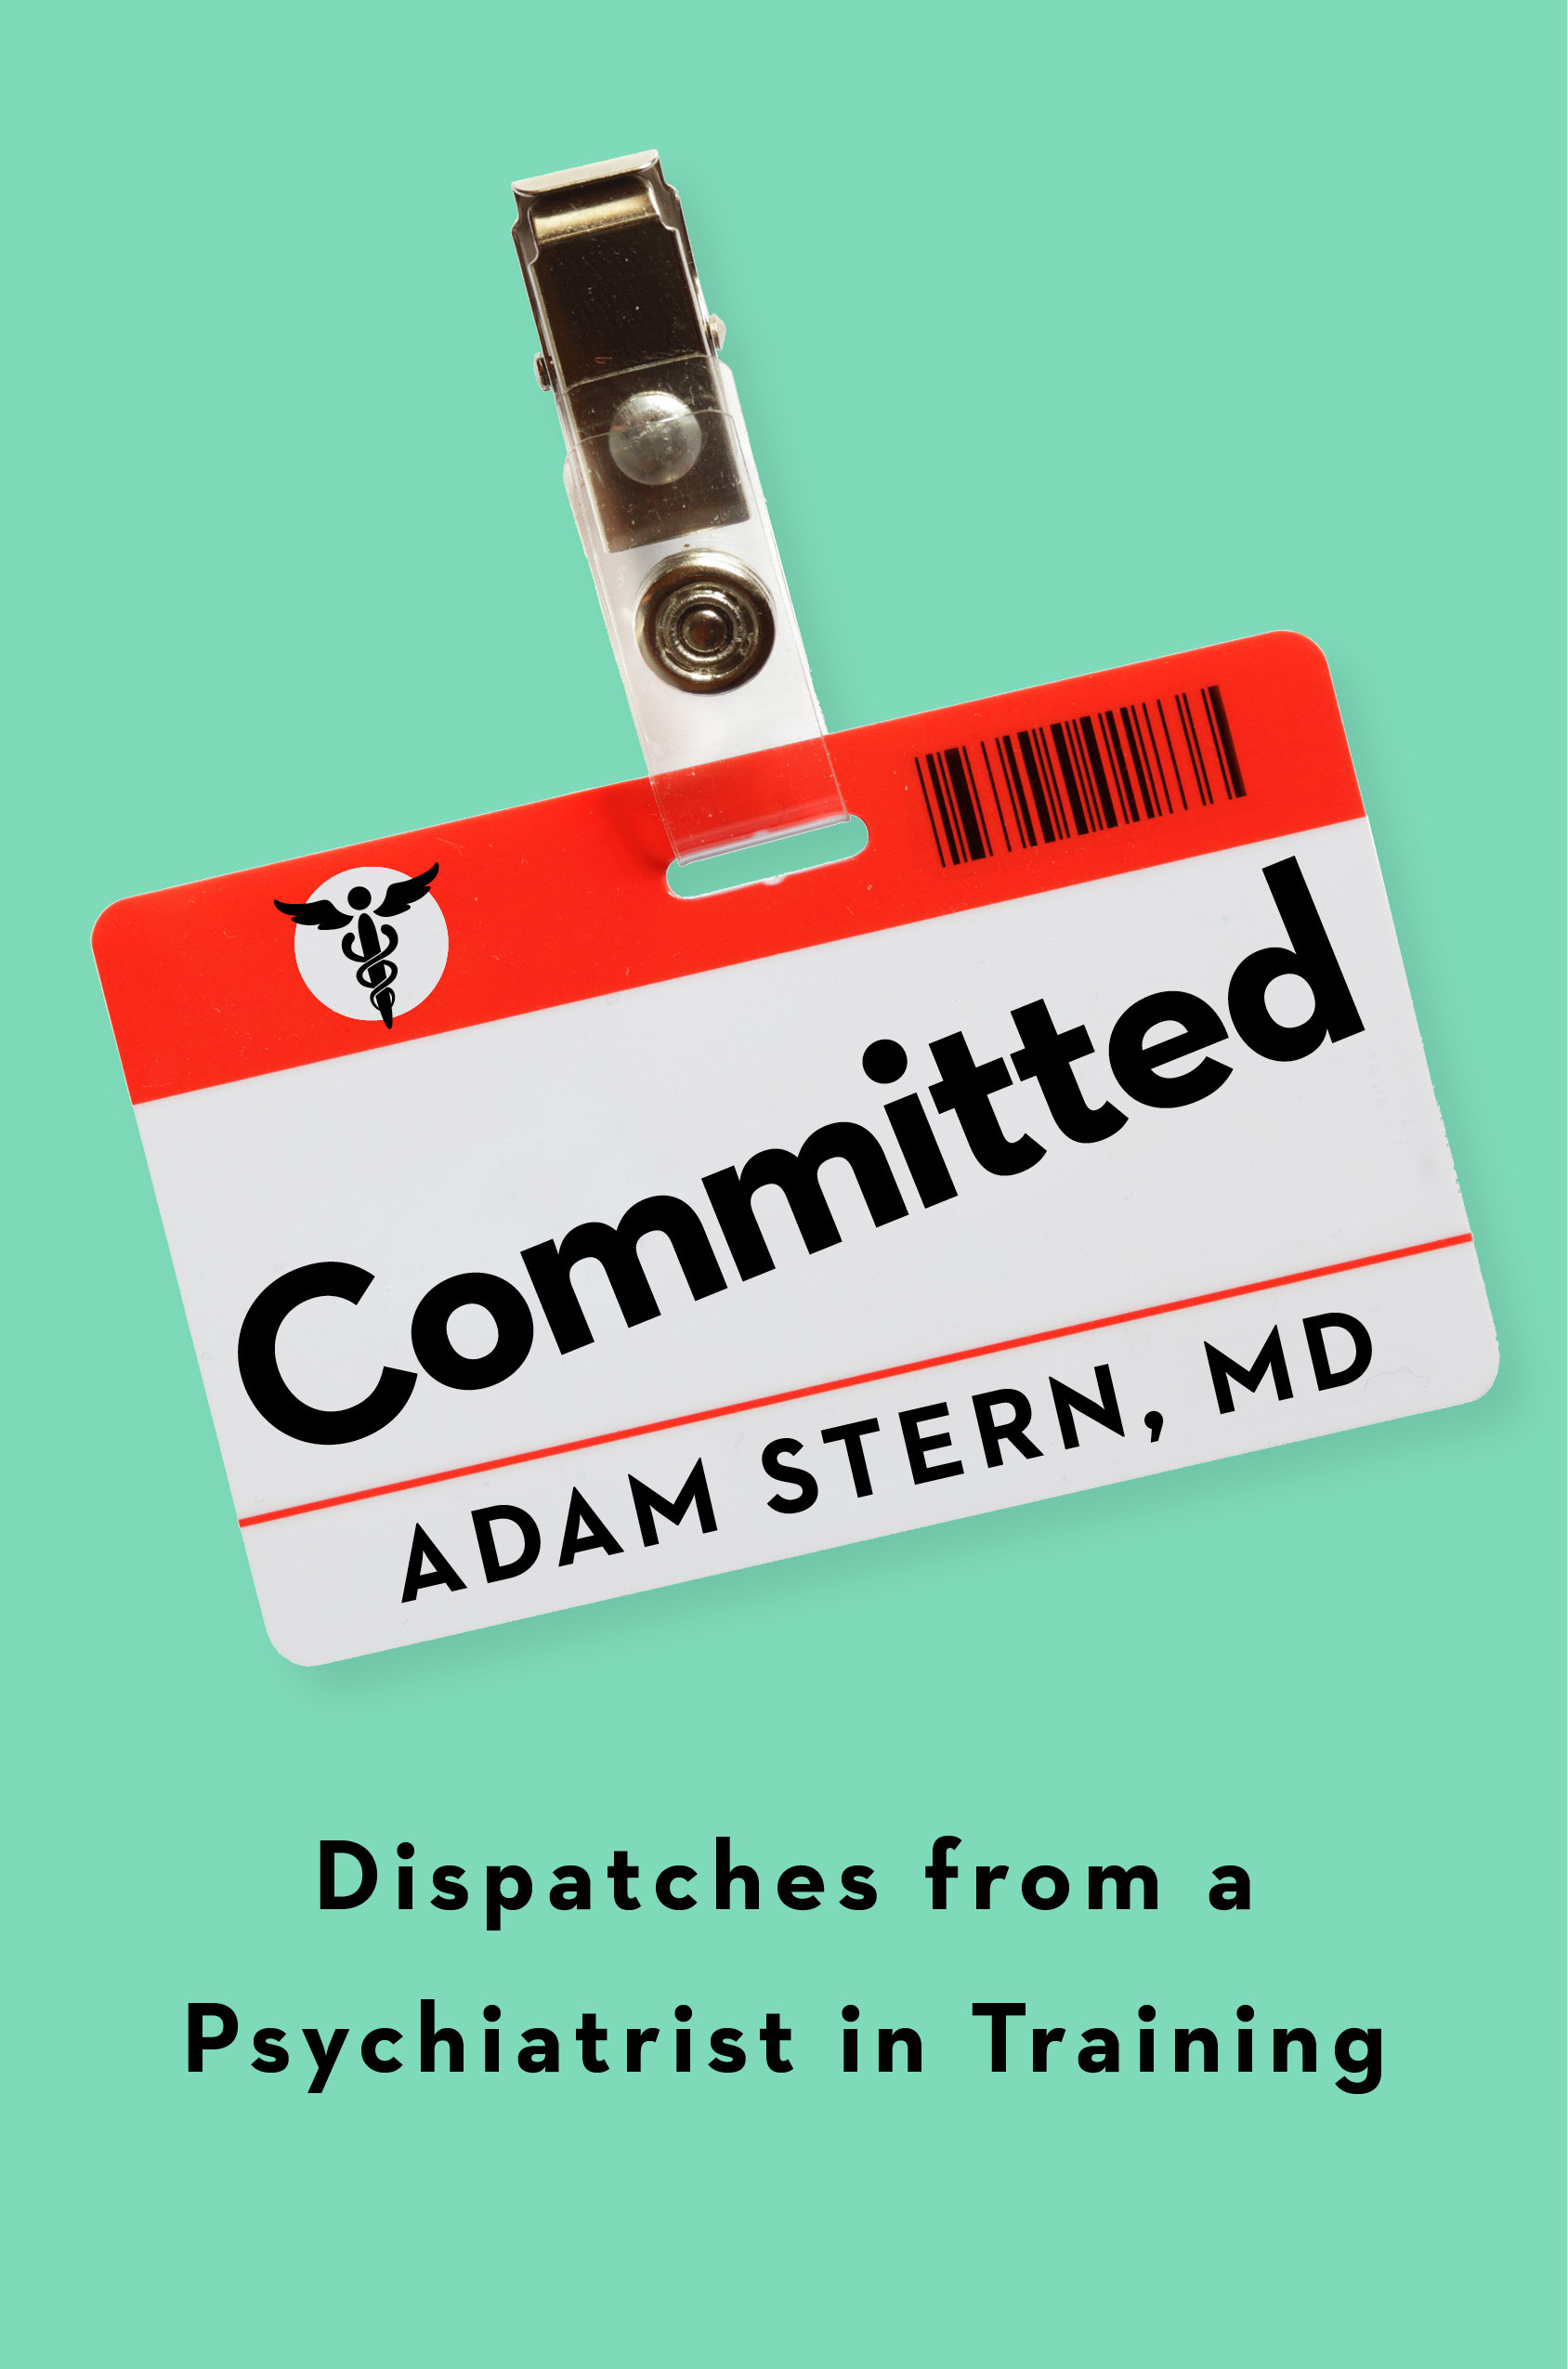 Committed by Adam Stern